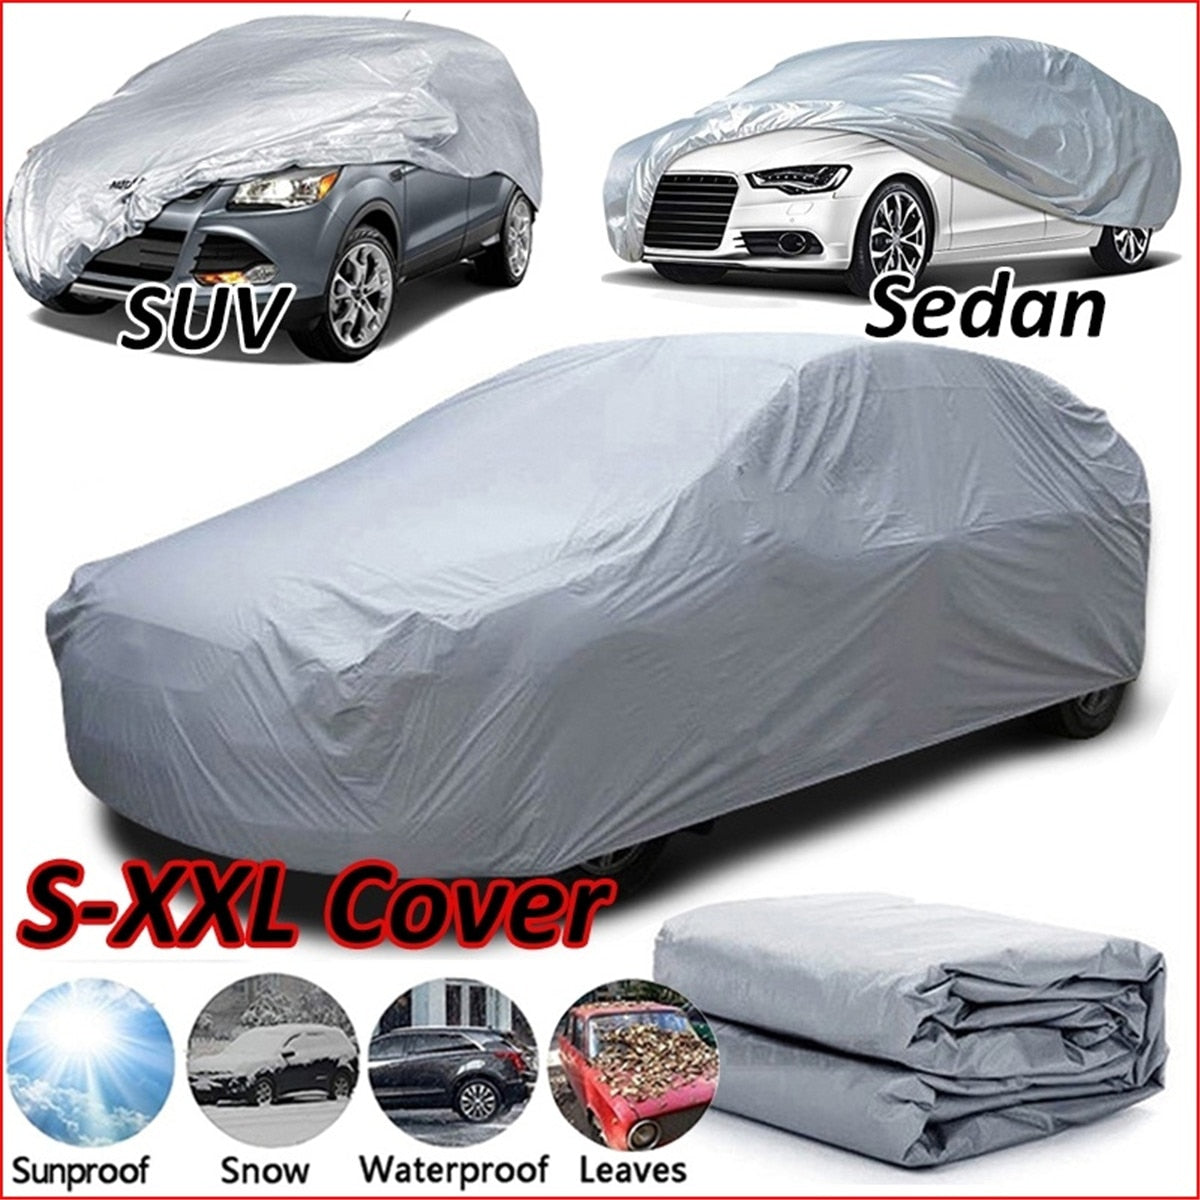 Automotive Car Truck Parts L Size Full Suv Car Cover Peva Waterproof For Bmw X3 Ford Edge Infiniti Qx50 Ex